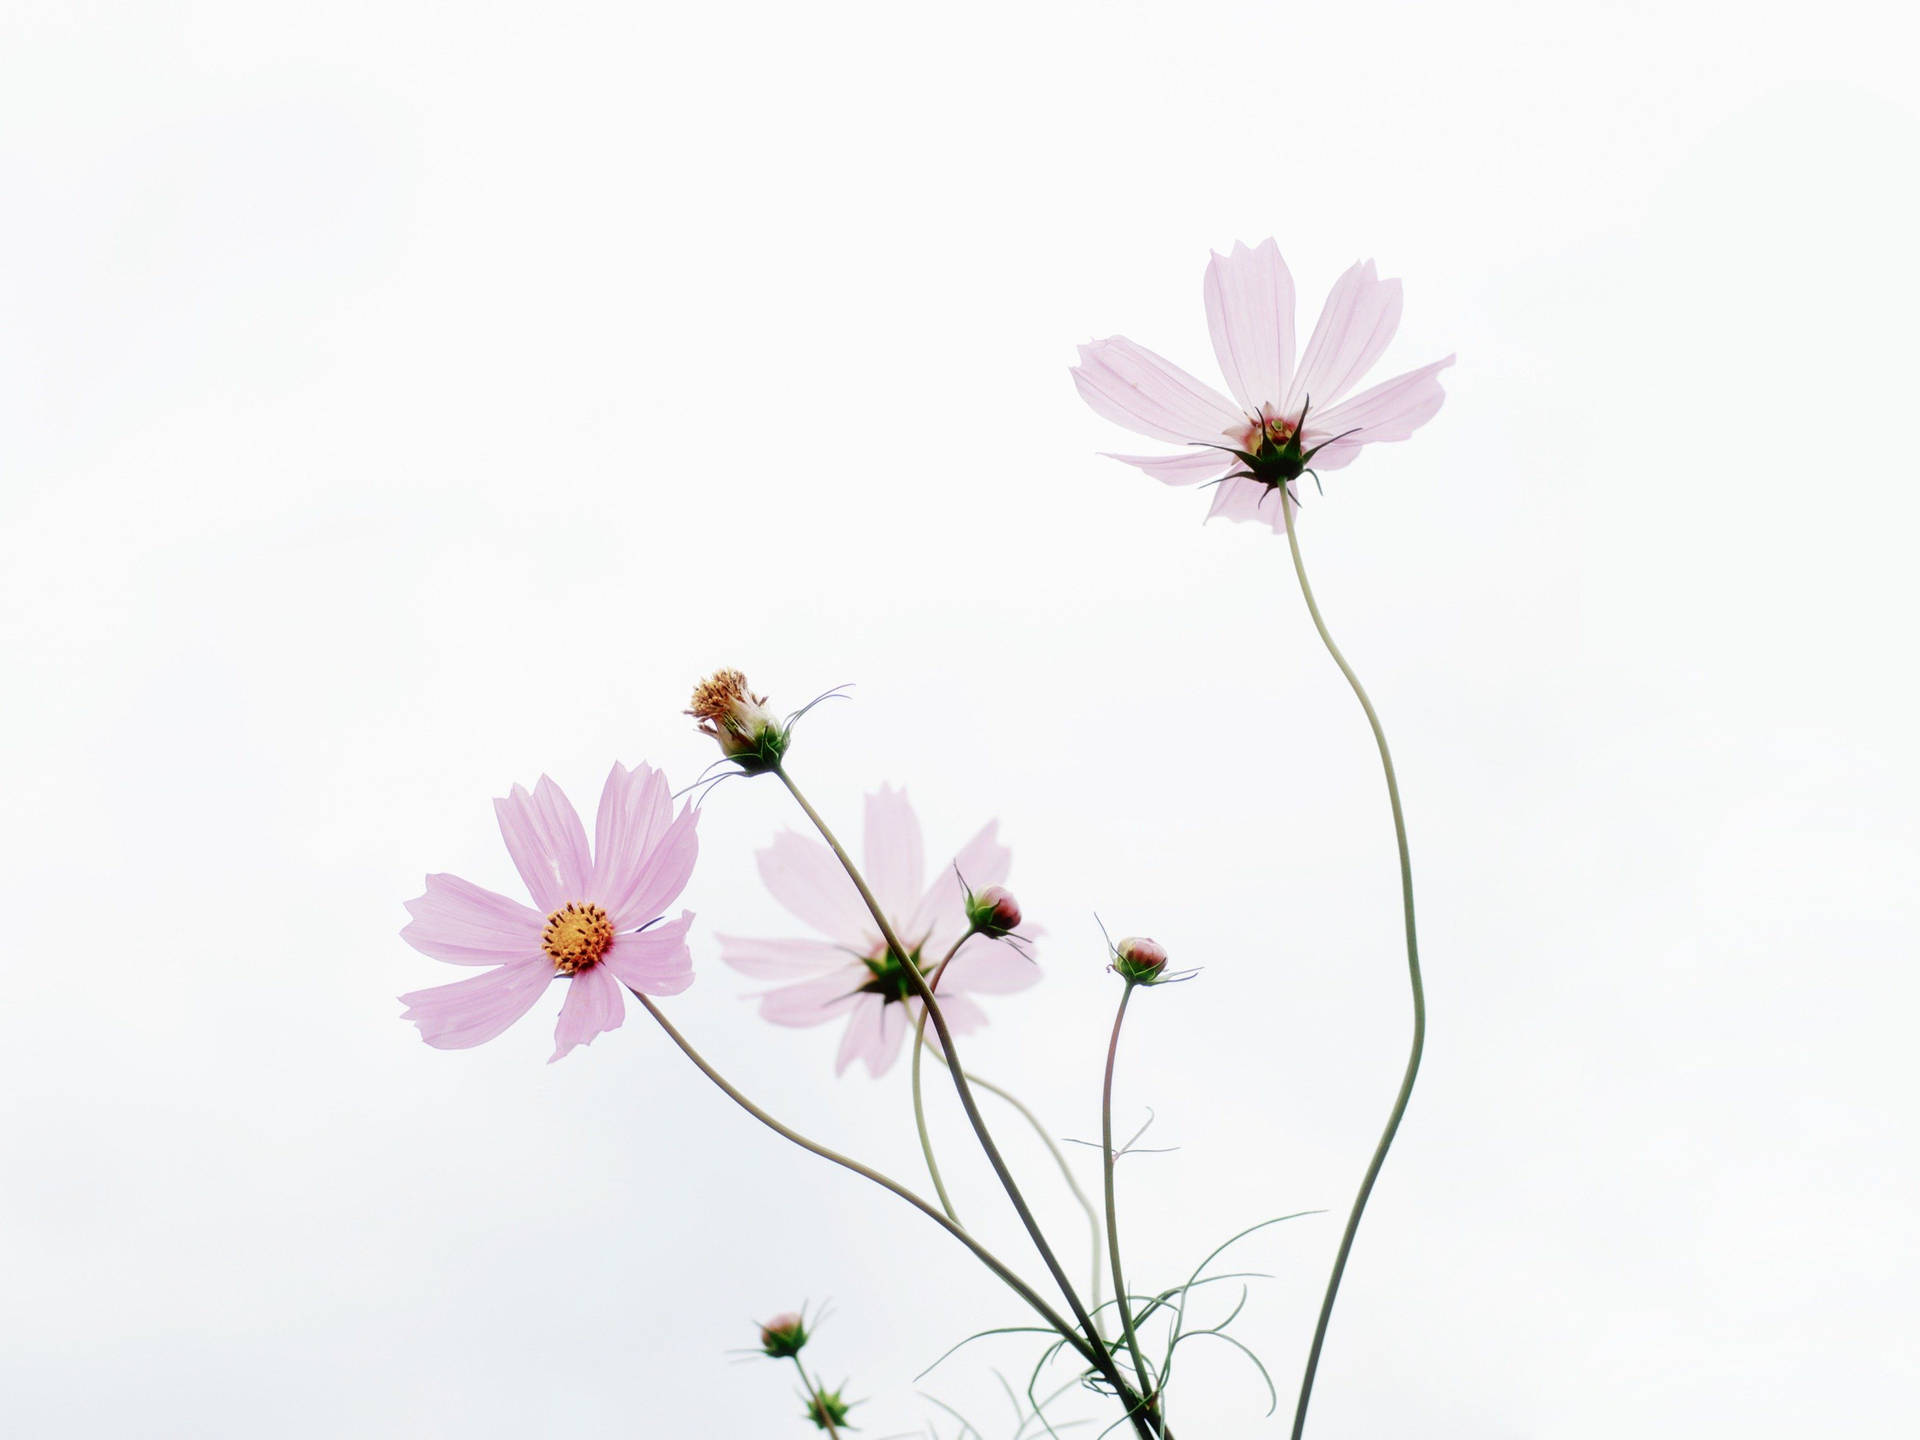 Enjoy the beauty of Spring in a Minimalist Style Wallpaper